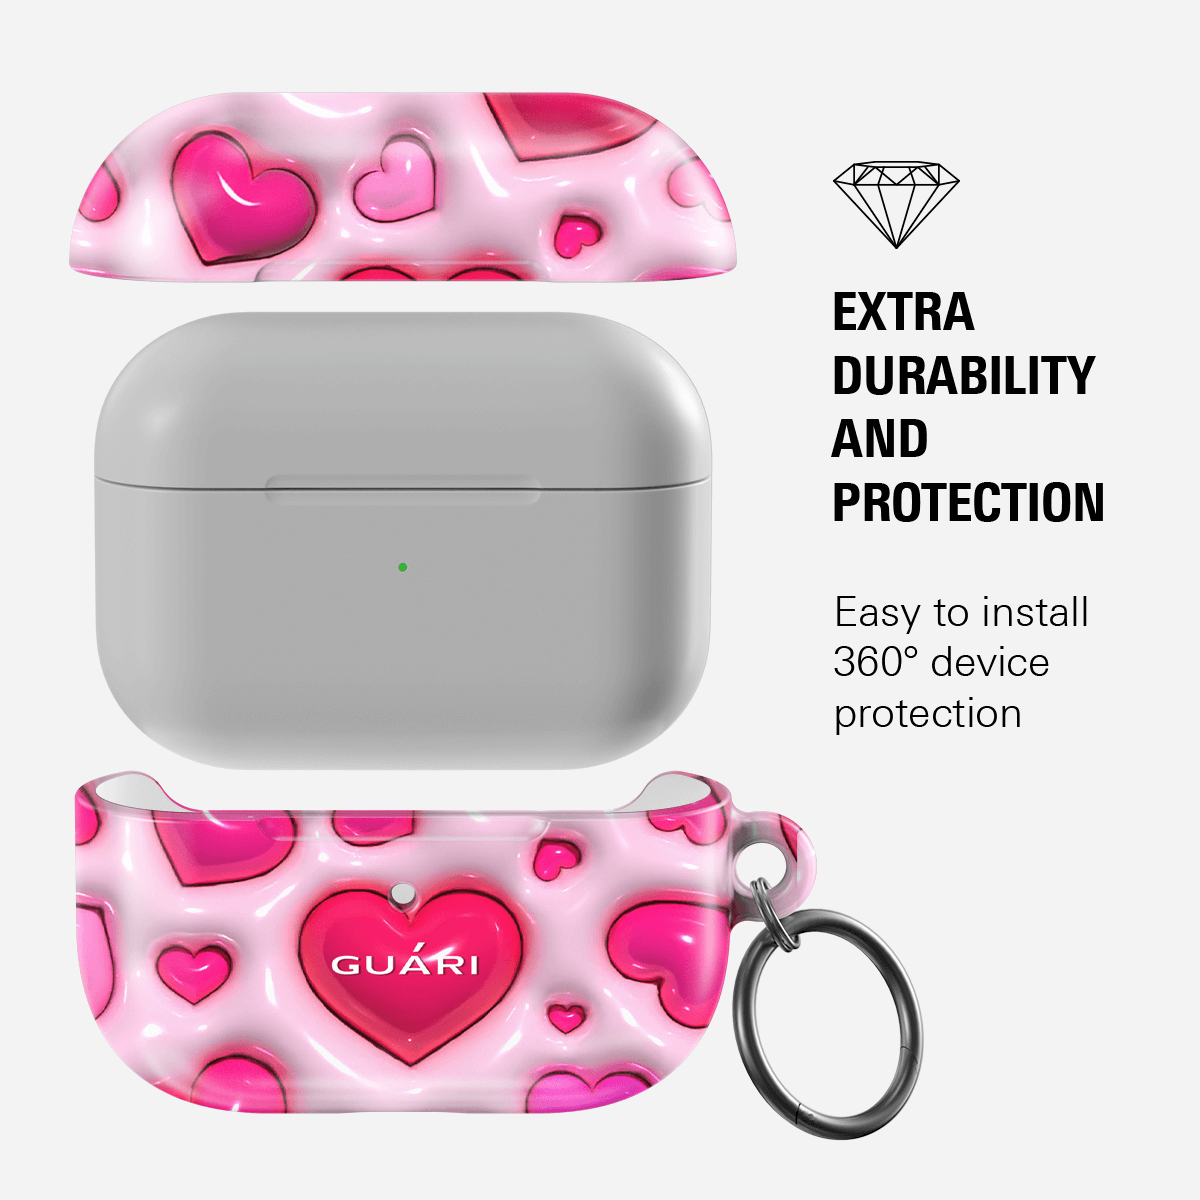 HEARTS PARTY AIRPODS CASE